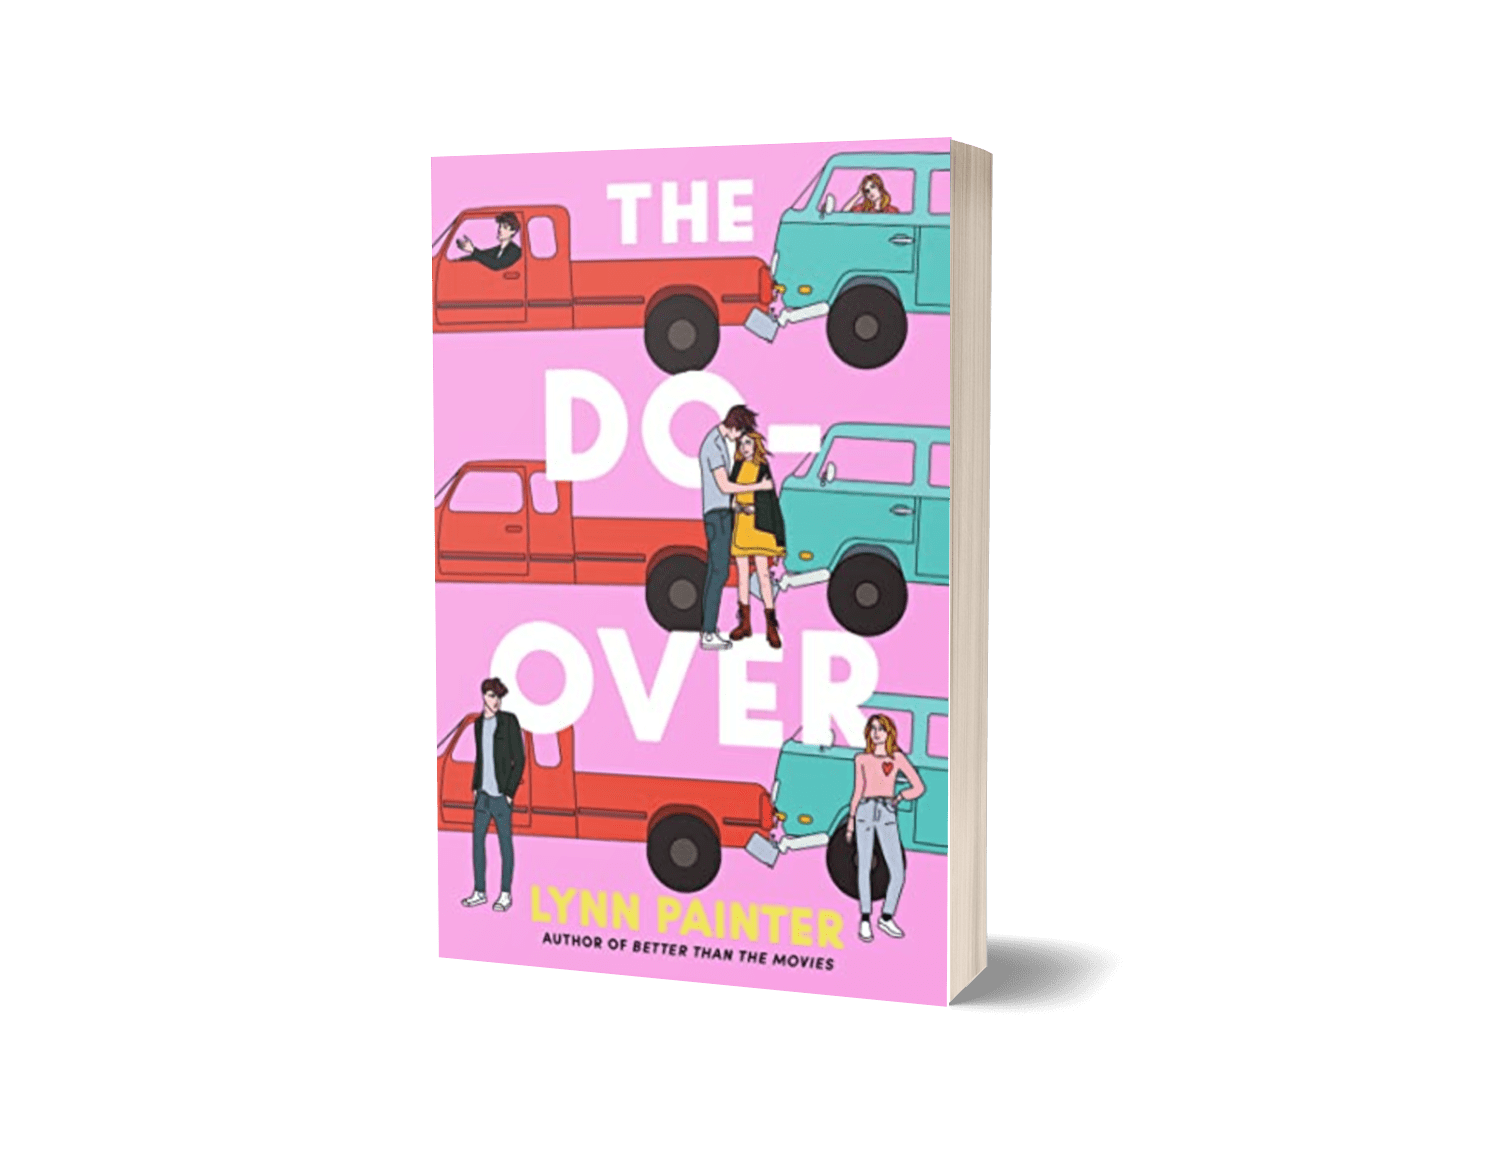 The Do Over by Suzanne Park